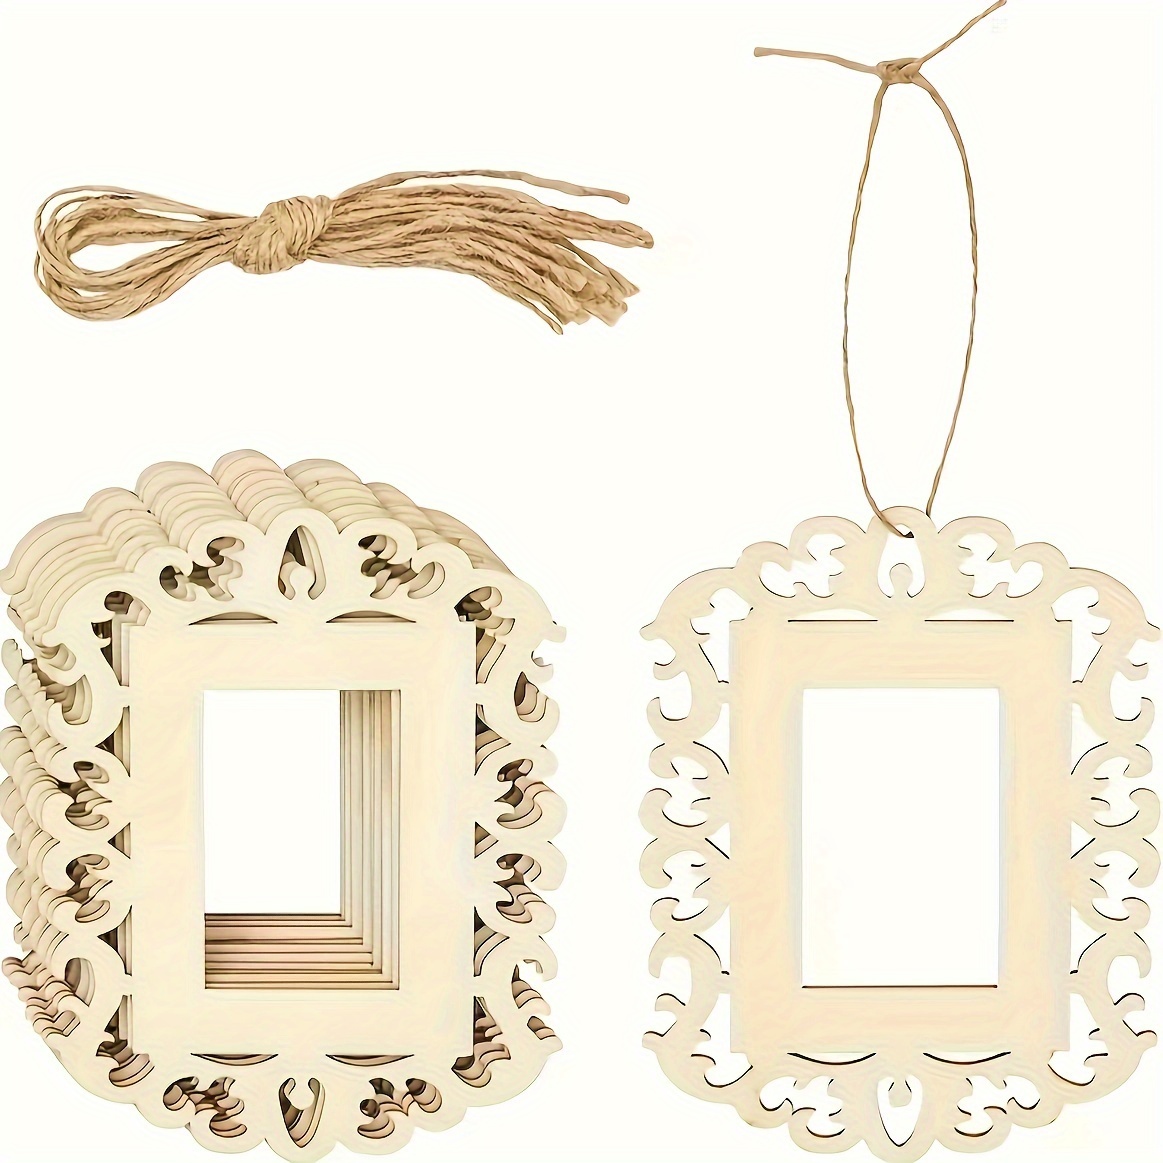 

10pcs Set Of Unfinished Wooden Photo Frames, For Crafts And Diy Christmas Family Party Decoration.